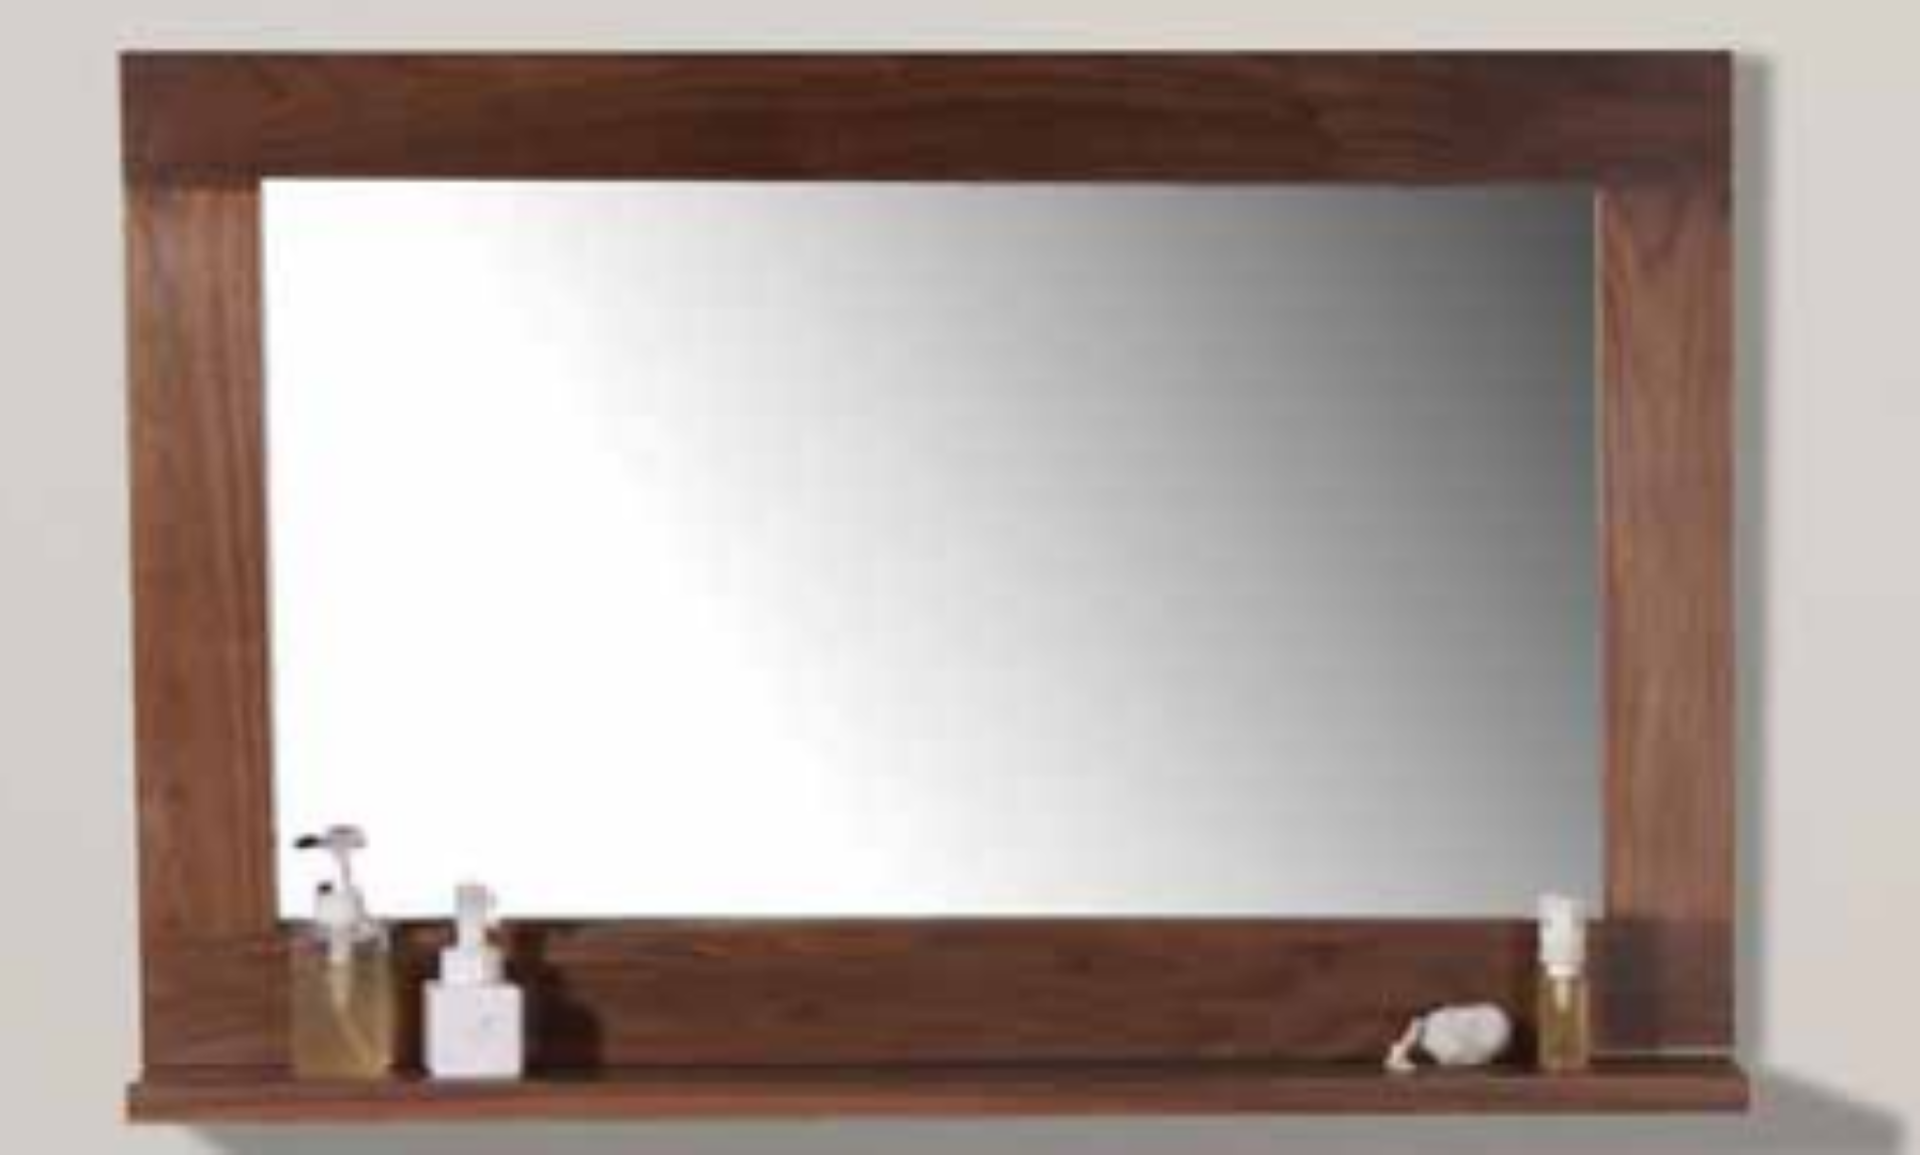 1 x Stonearth Bathroom Wall Mirror With Solid Walnut Frame and Bevelled Glass Mirror - Size: Large - Image 2 of 11